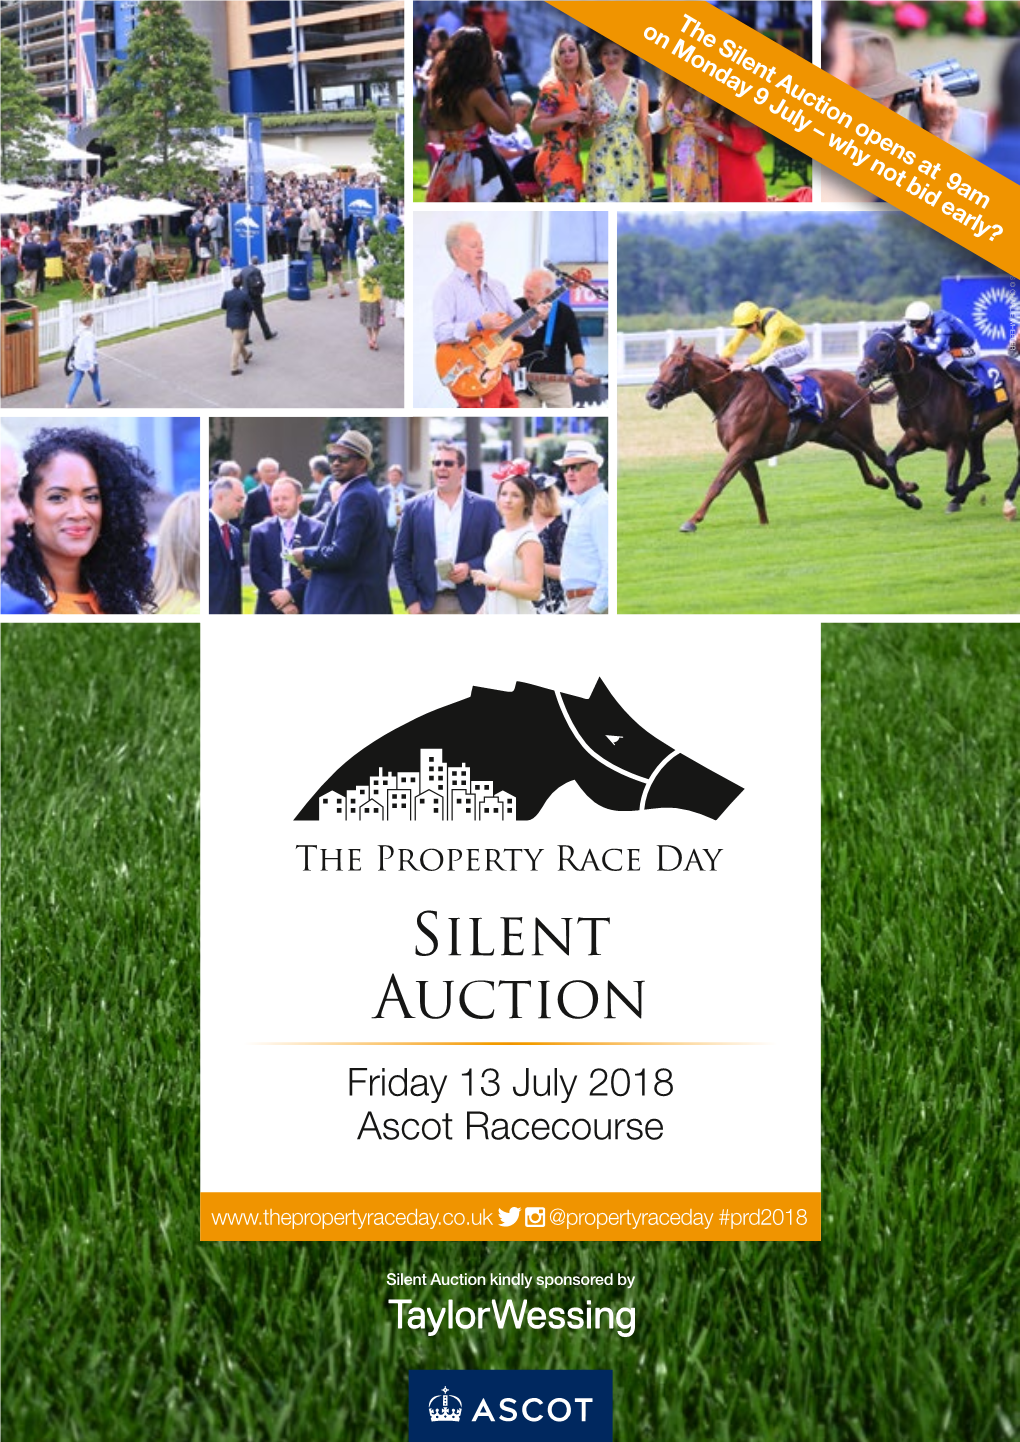 Silent Auction Friday 13 July 2018 Ascot Racecourse